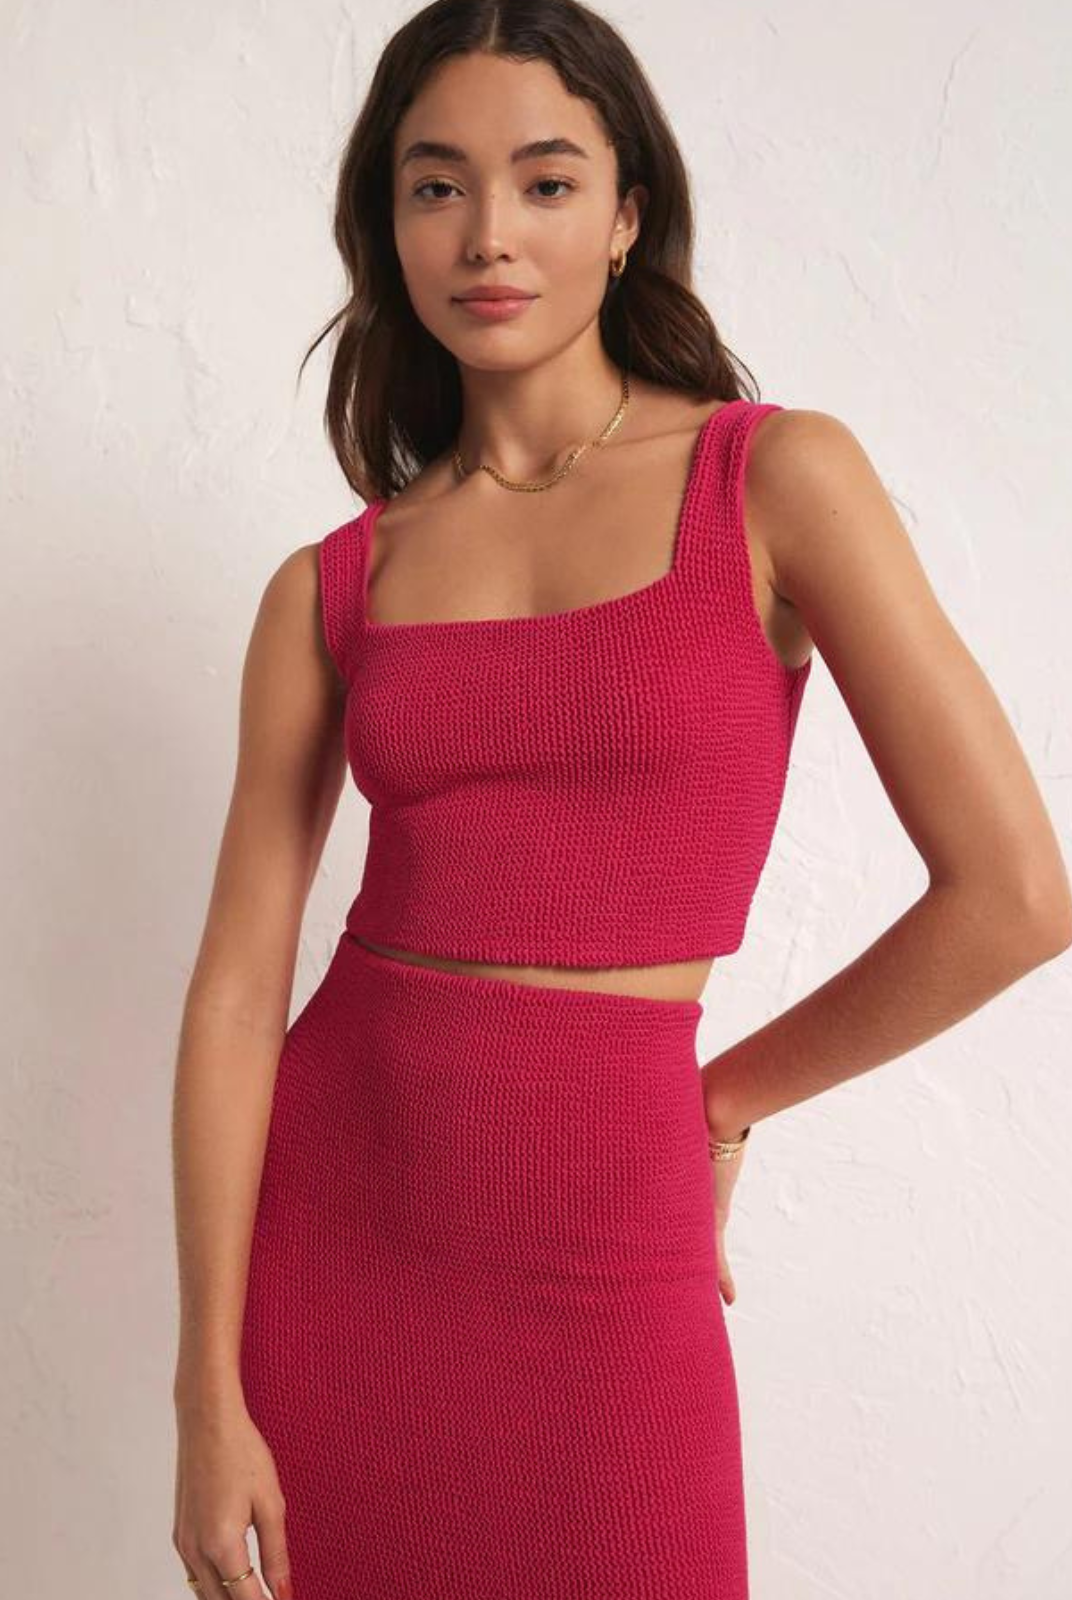 Z Supply Andez Crinkle Knit Tank. Keep it classy with this sleek tank. You'll love the bra friendly straps, flattering squared neckline, and meet and greet length.